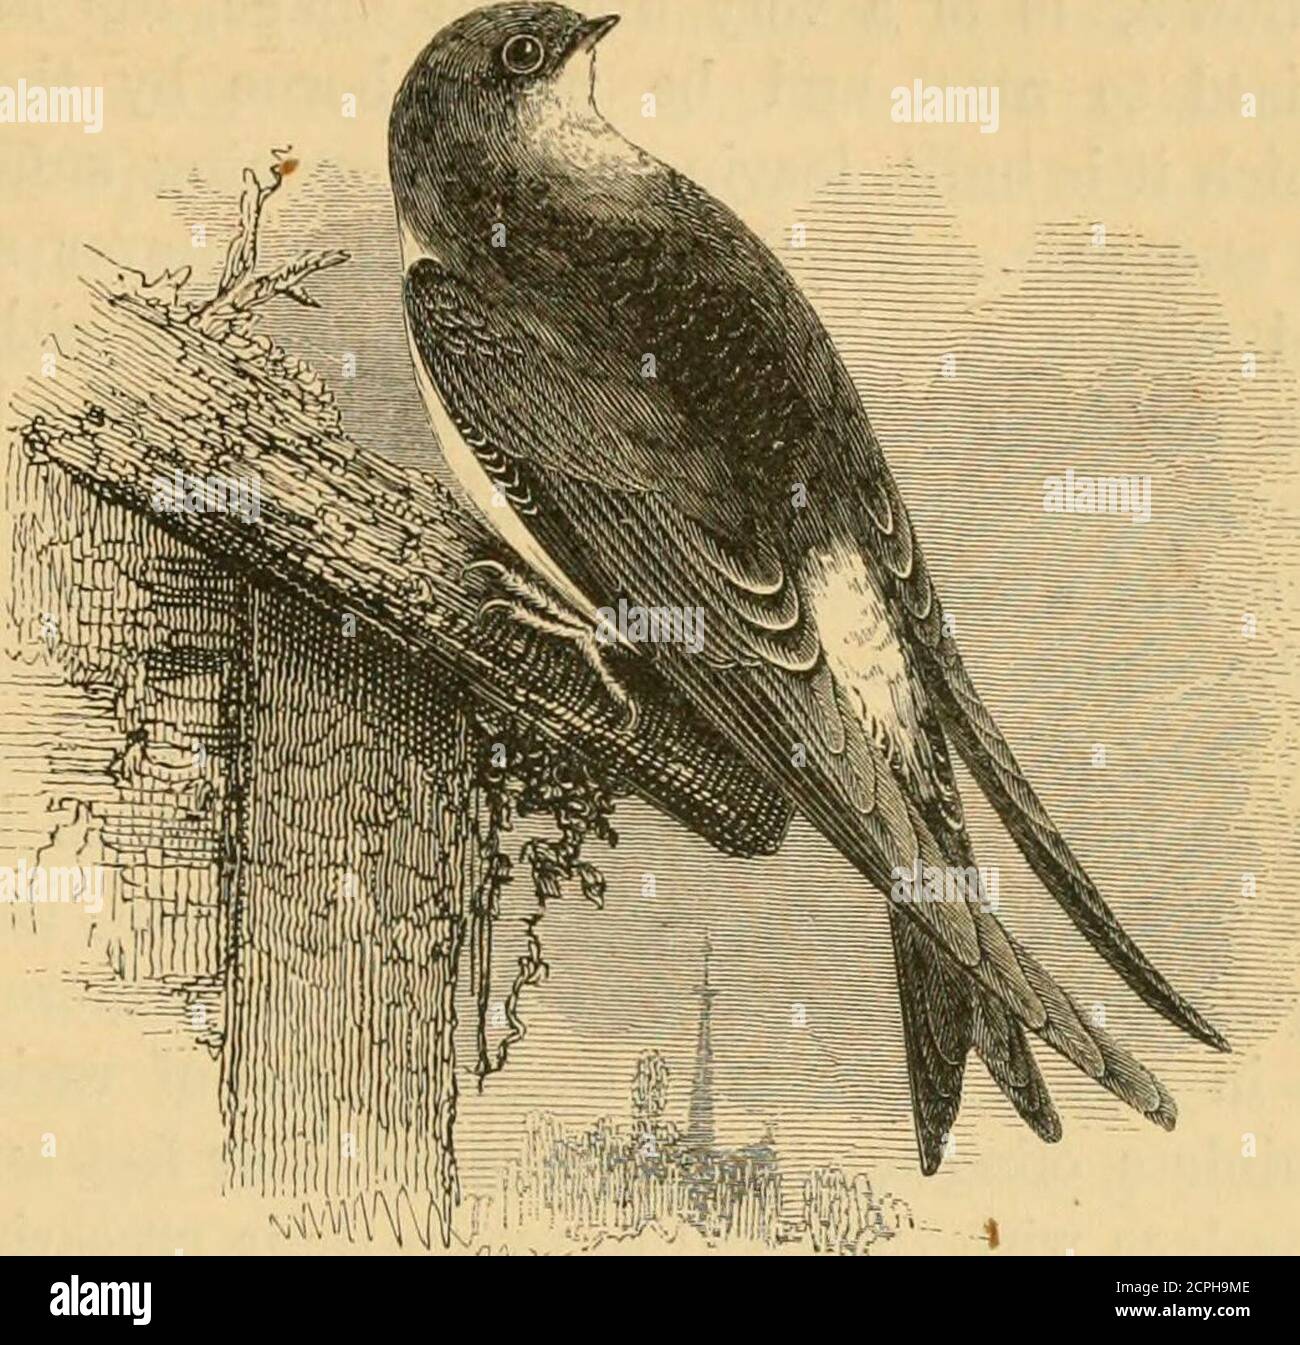 . A history of British birds . MARTIN. PASSE RES. 349 IIIRUNDINIDJS.. Chelidon urbica (Linnaeus*).THE MARTIN.Hirundo urhica. Chelidon, F. Boie.f—Bill short, depressed and very wide at the base, cominis-sure slightly decurved. Nostrils basal, oval, partly closed by a membrane andopening laterally. Wings, with nine primaries, long and pointed. Tail forked,of twelve feathers, the outermost not abruptly attenuated. Legs and feetslender, closely feathered above, toes rather long, three in front, one behind,claws moderate, sharp. The spring-appearance of the Martin in Europe is usuallysome days late Stock Photo